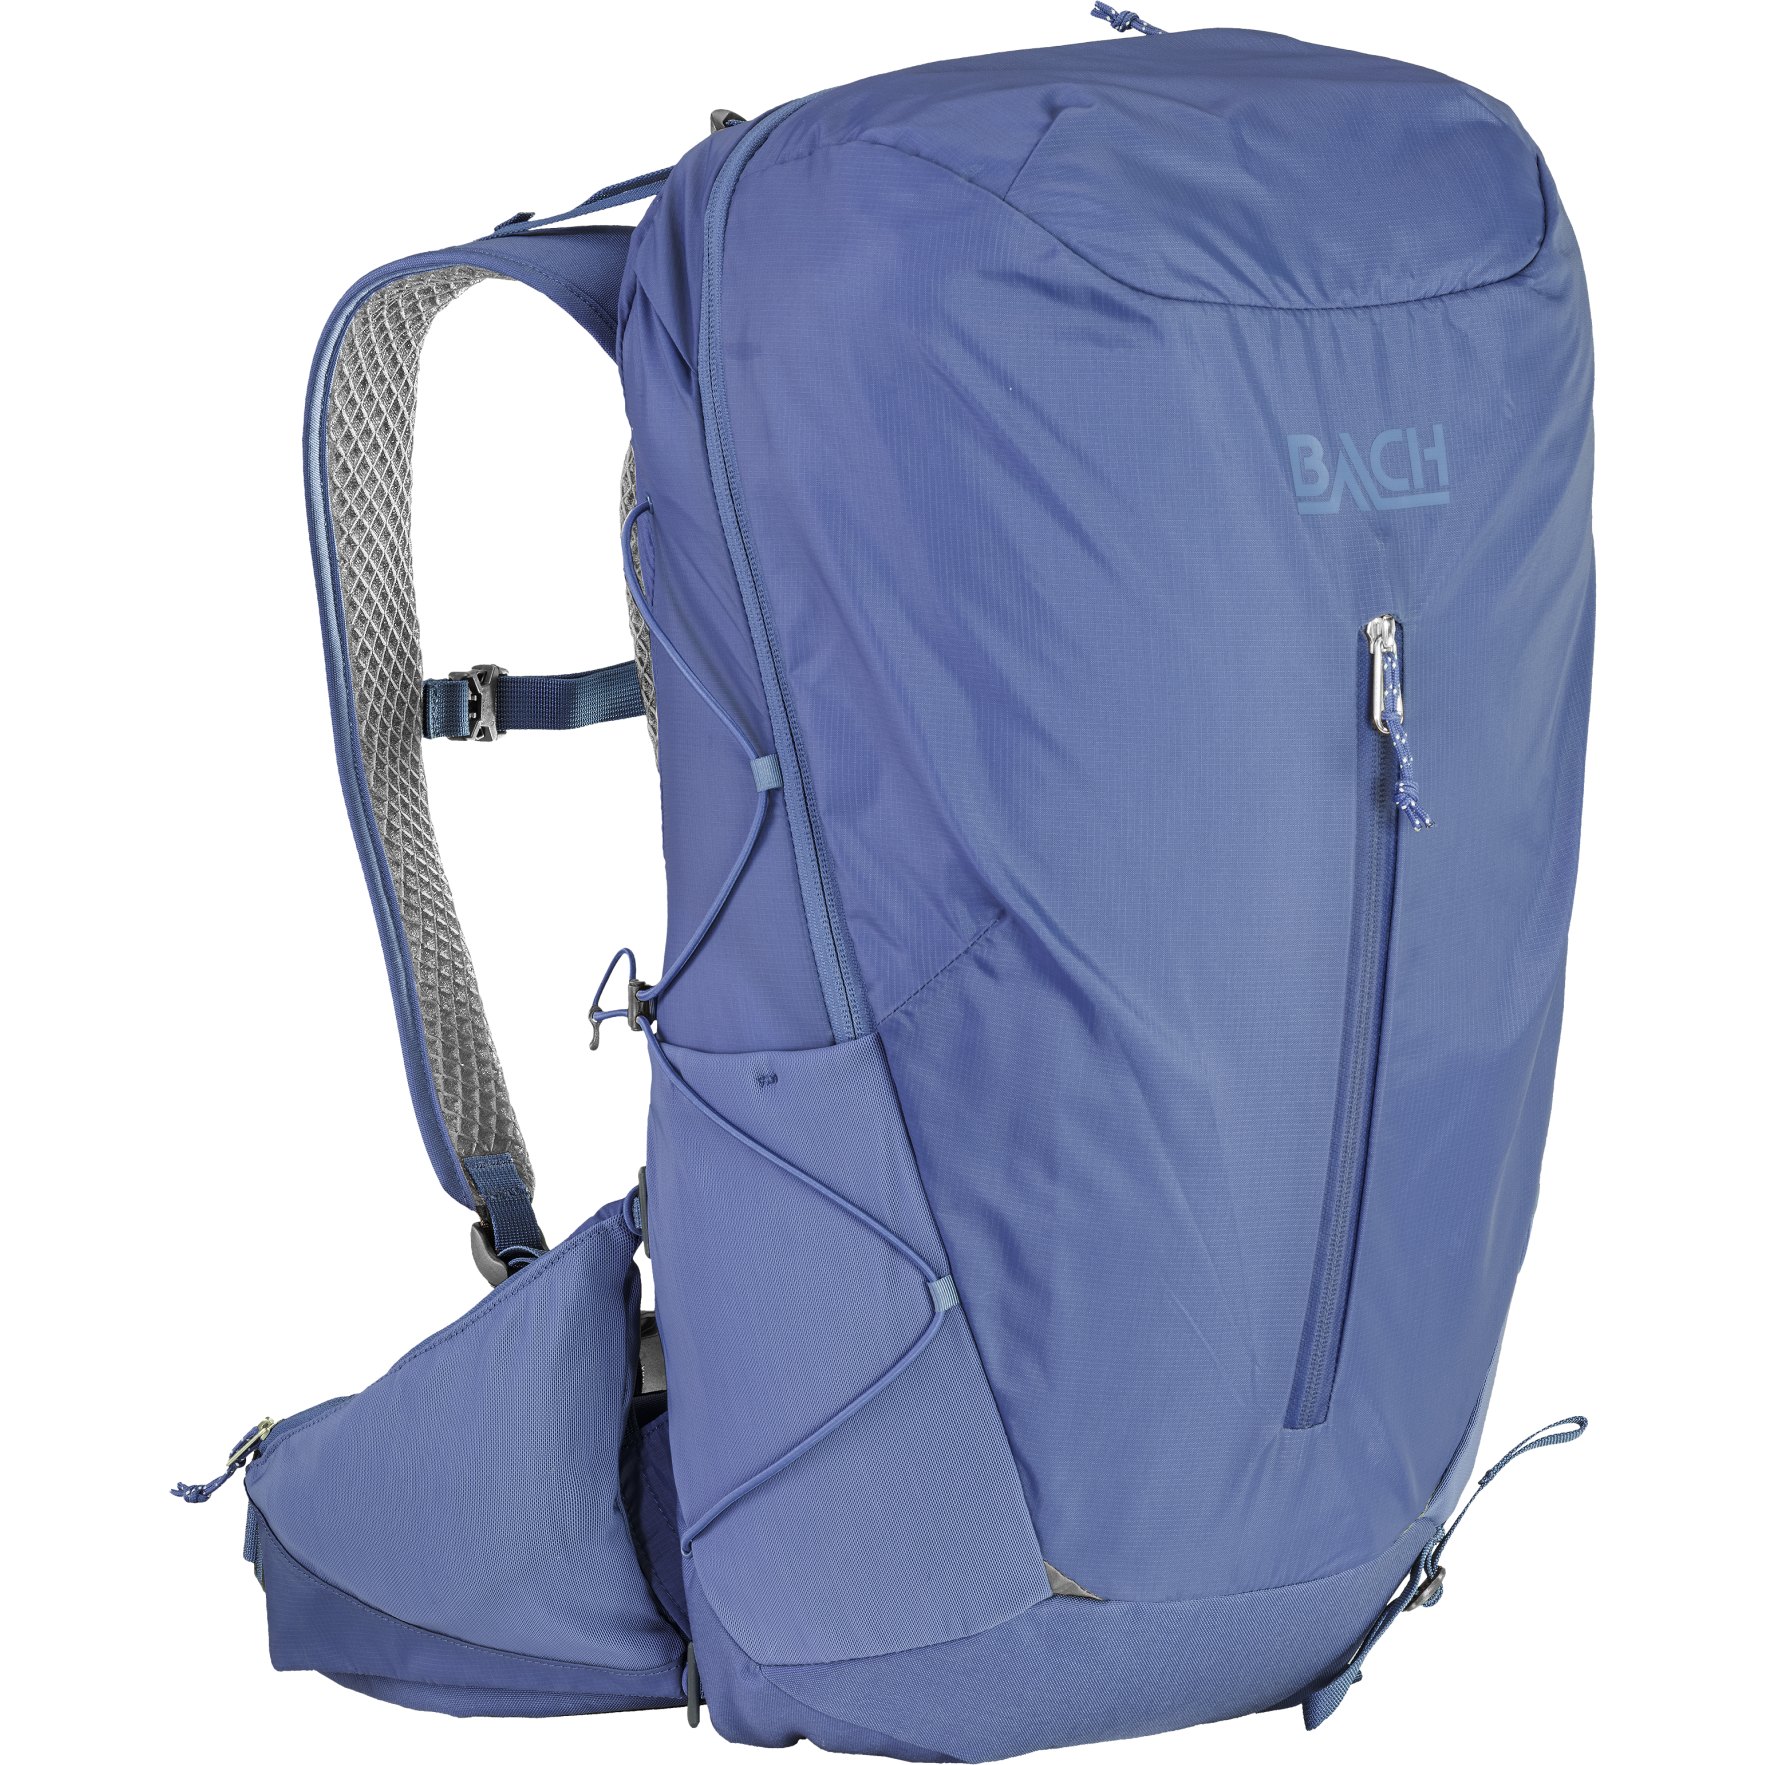 Picture of Bach Shield 26 Backpack - rivera blue